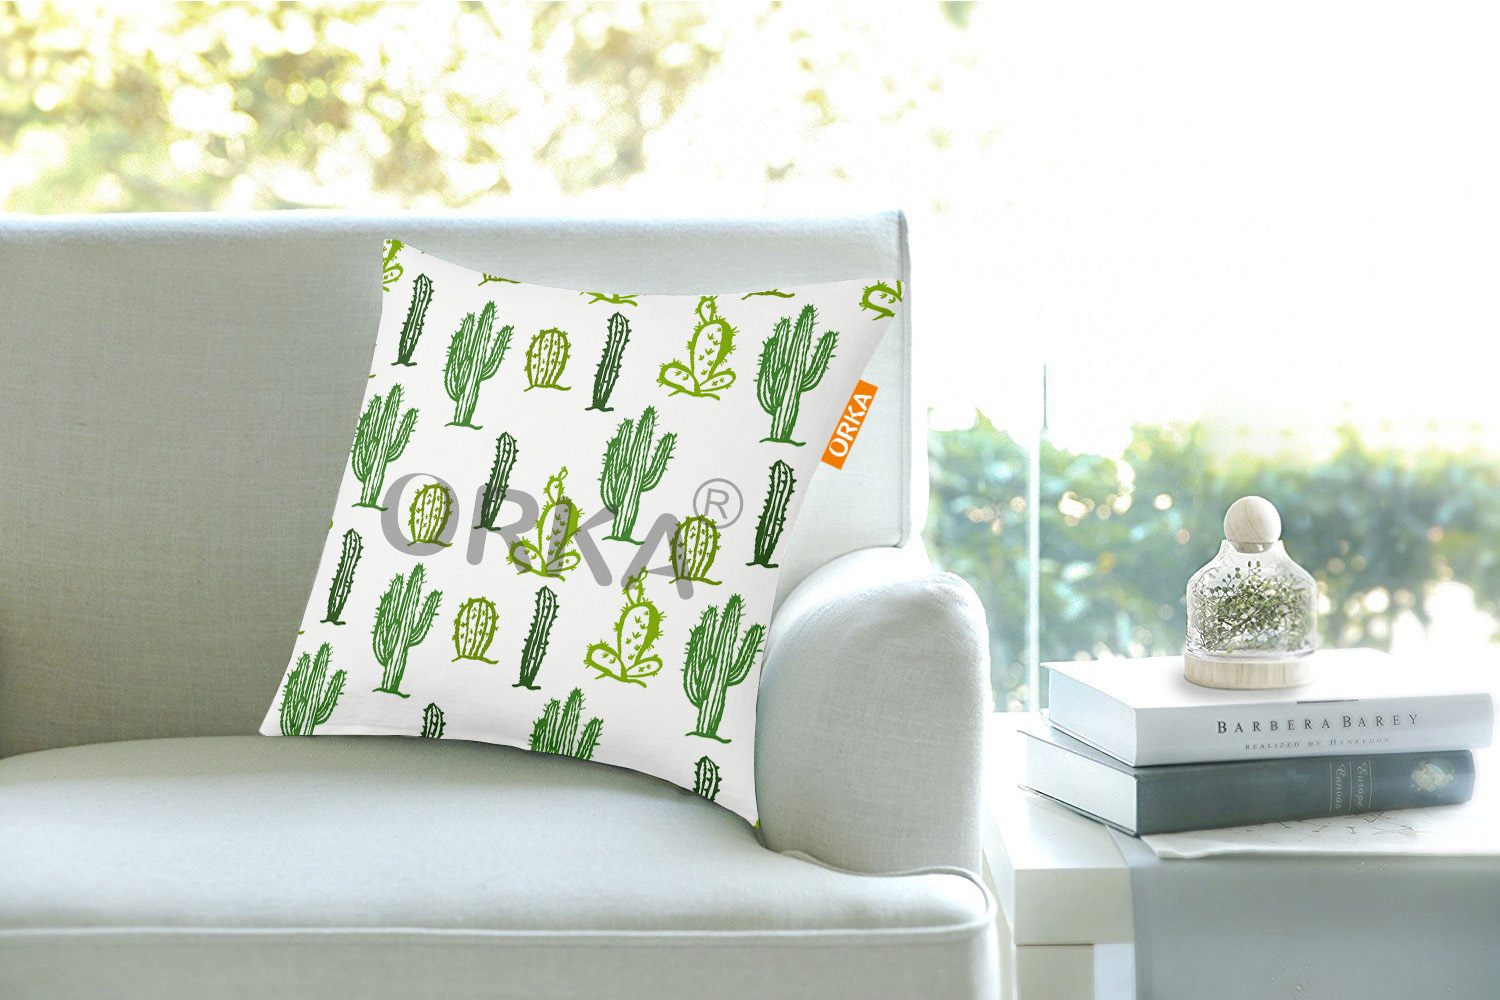 ORKA Cactus Theme Digital Printed Cushion 14"x14" Cover Only